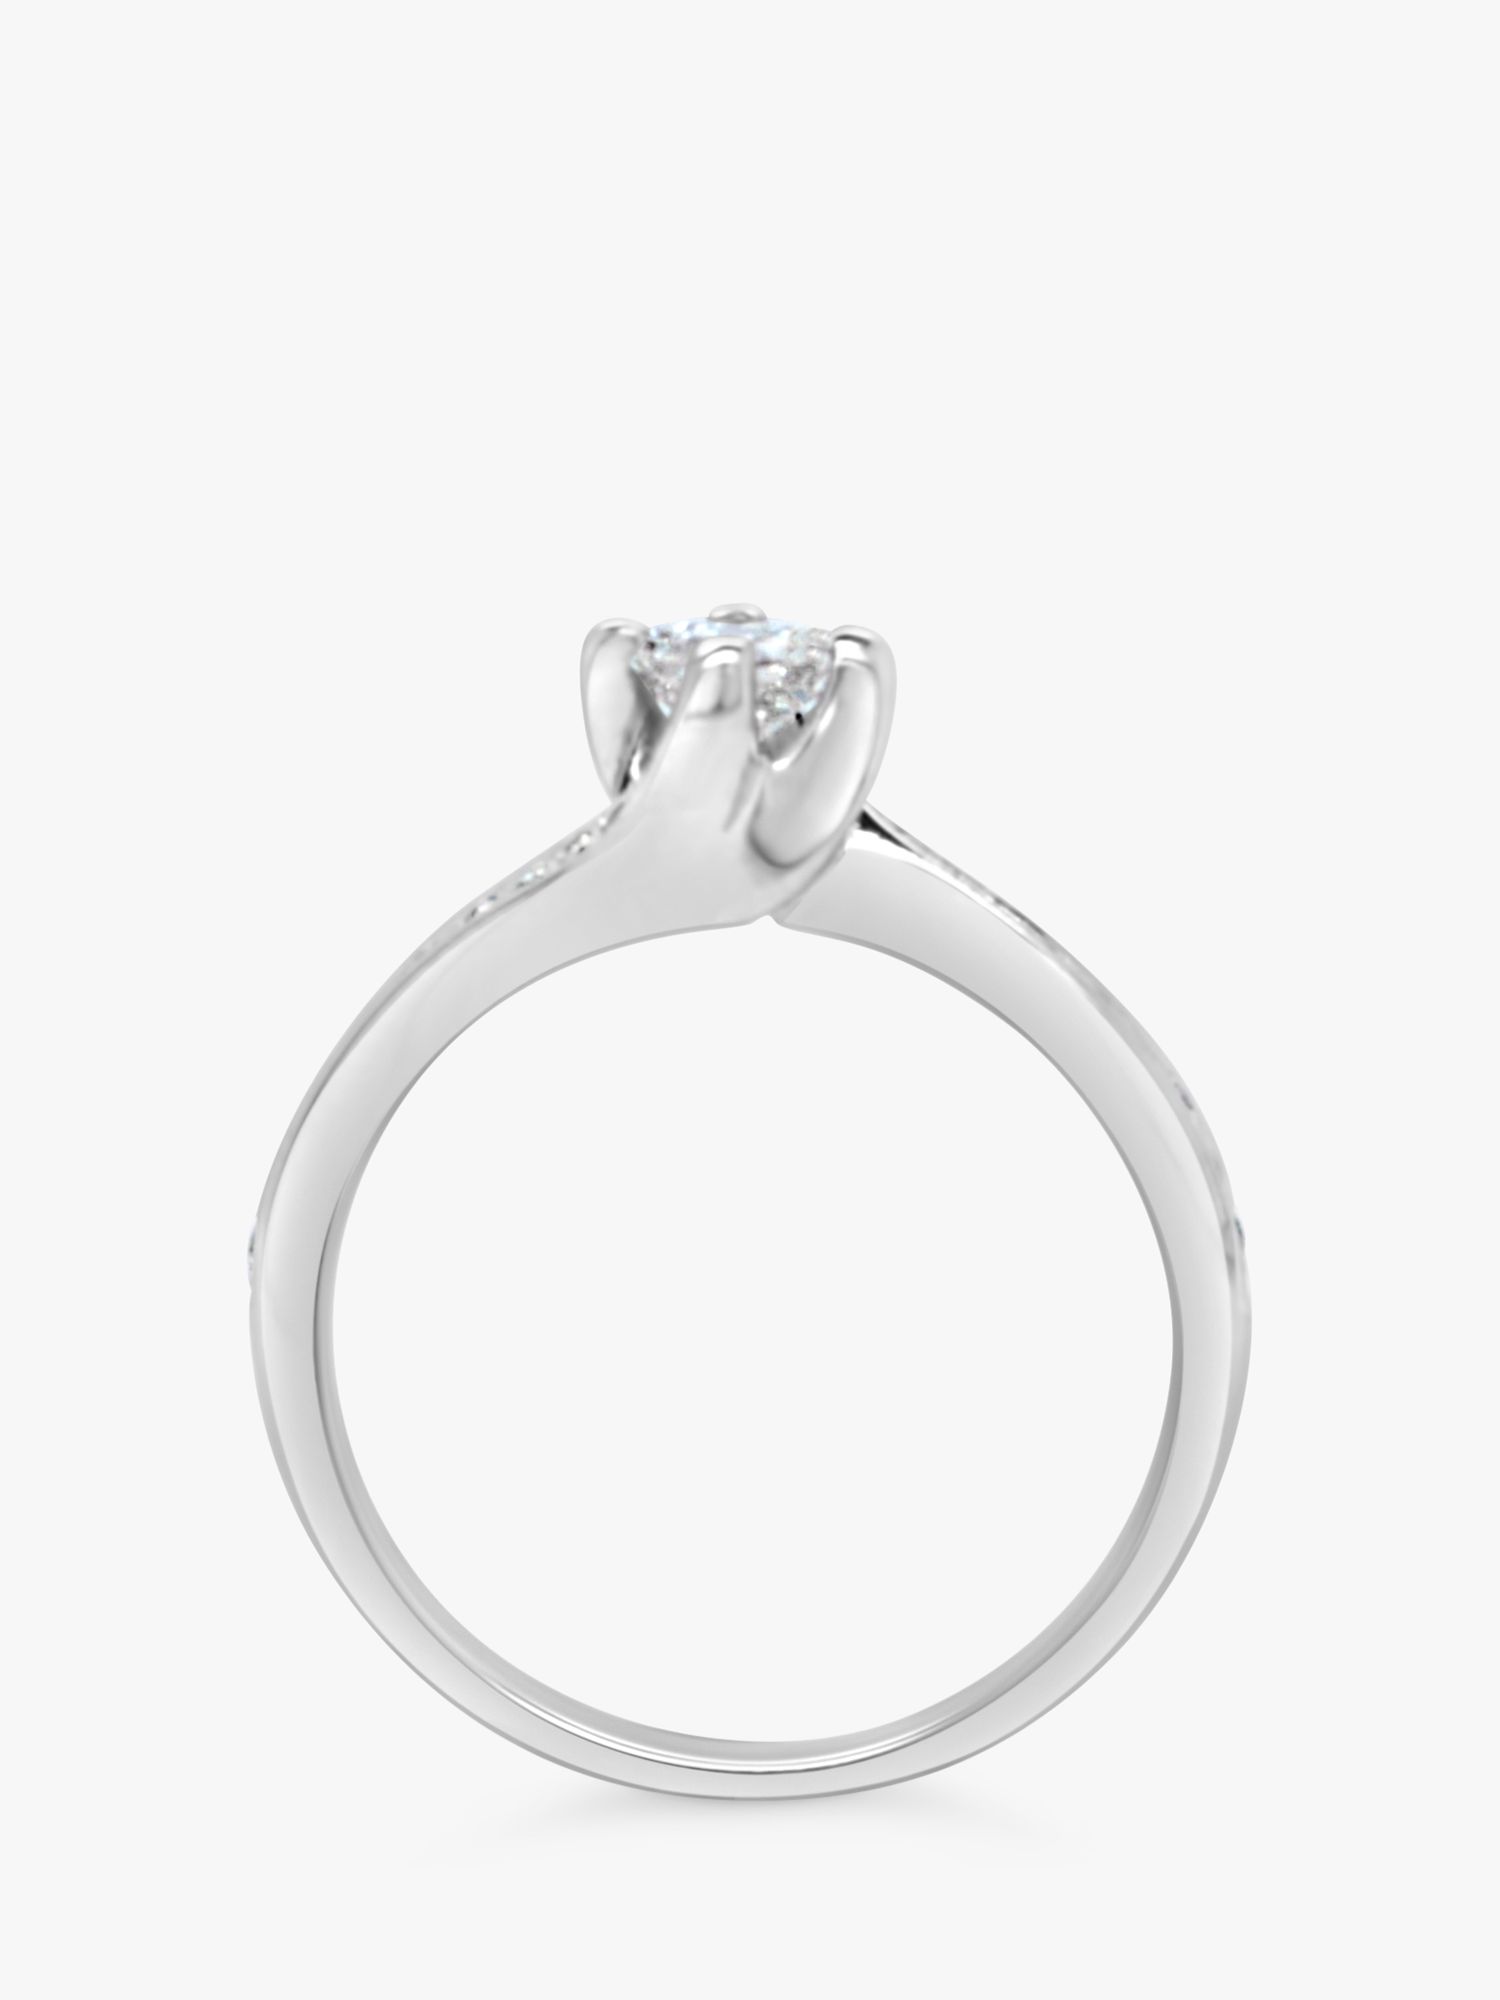 Buy Milton & Humble Jewellery Second Hand 18ct White Gold Diamond Twist Engagement Ring Online at johnlewis.com